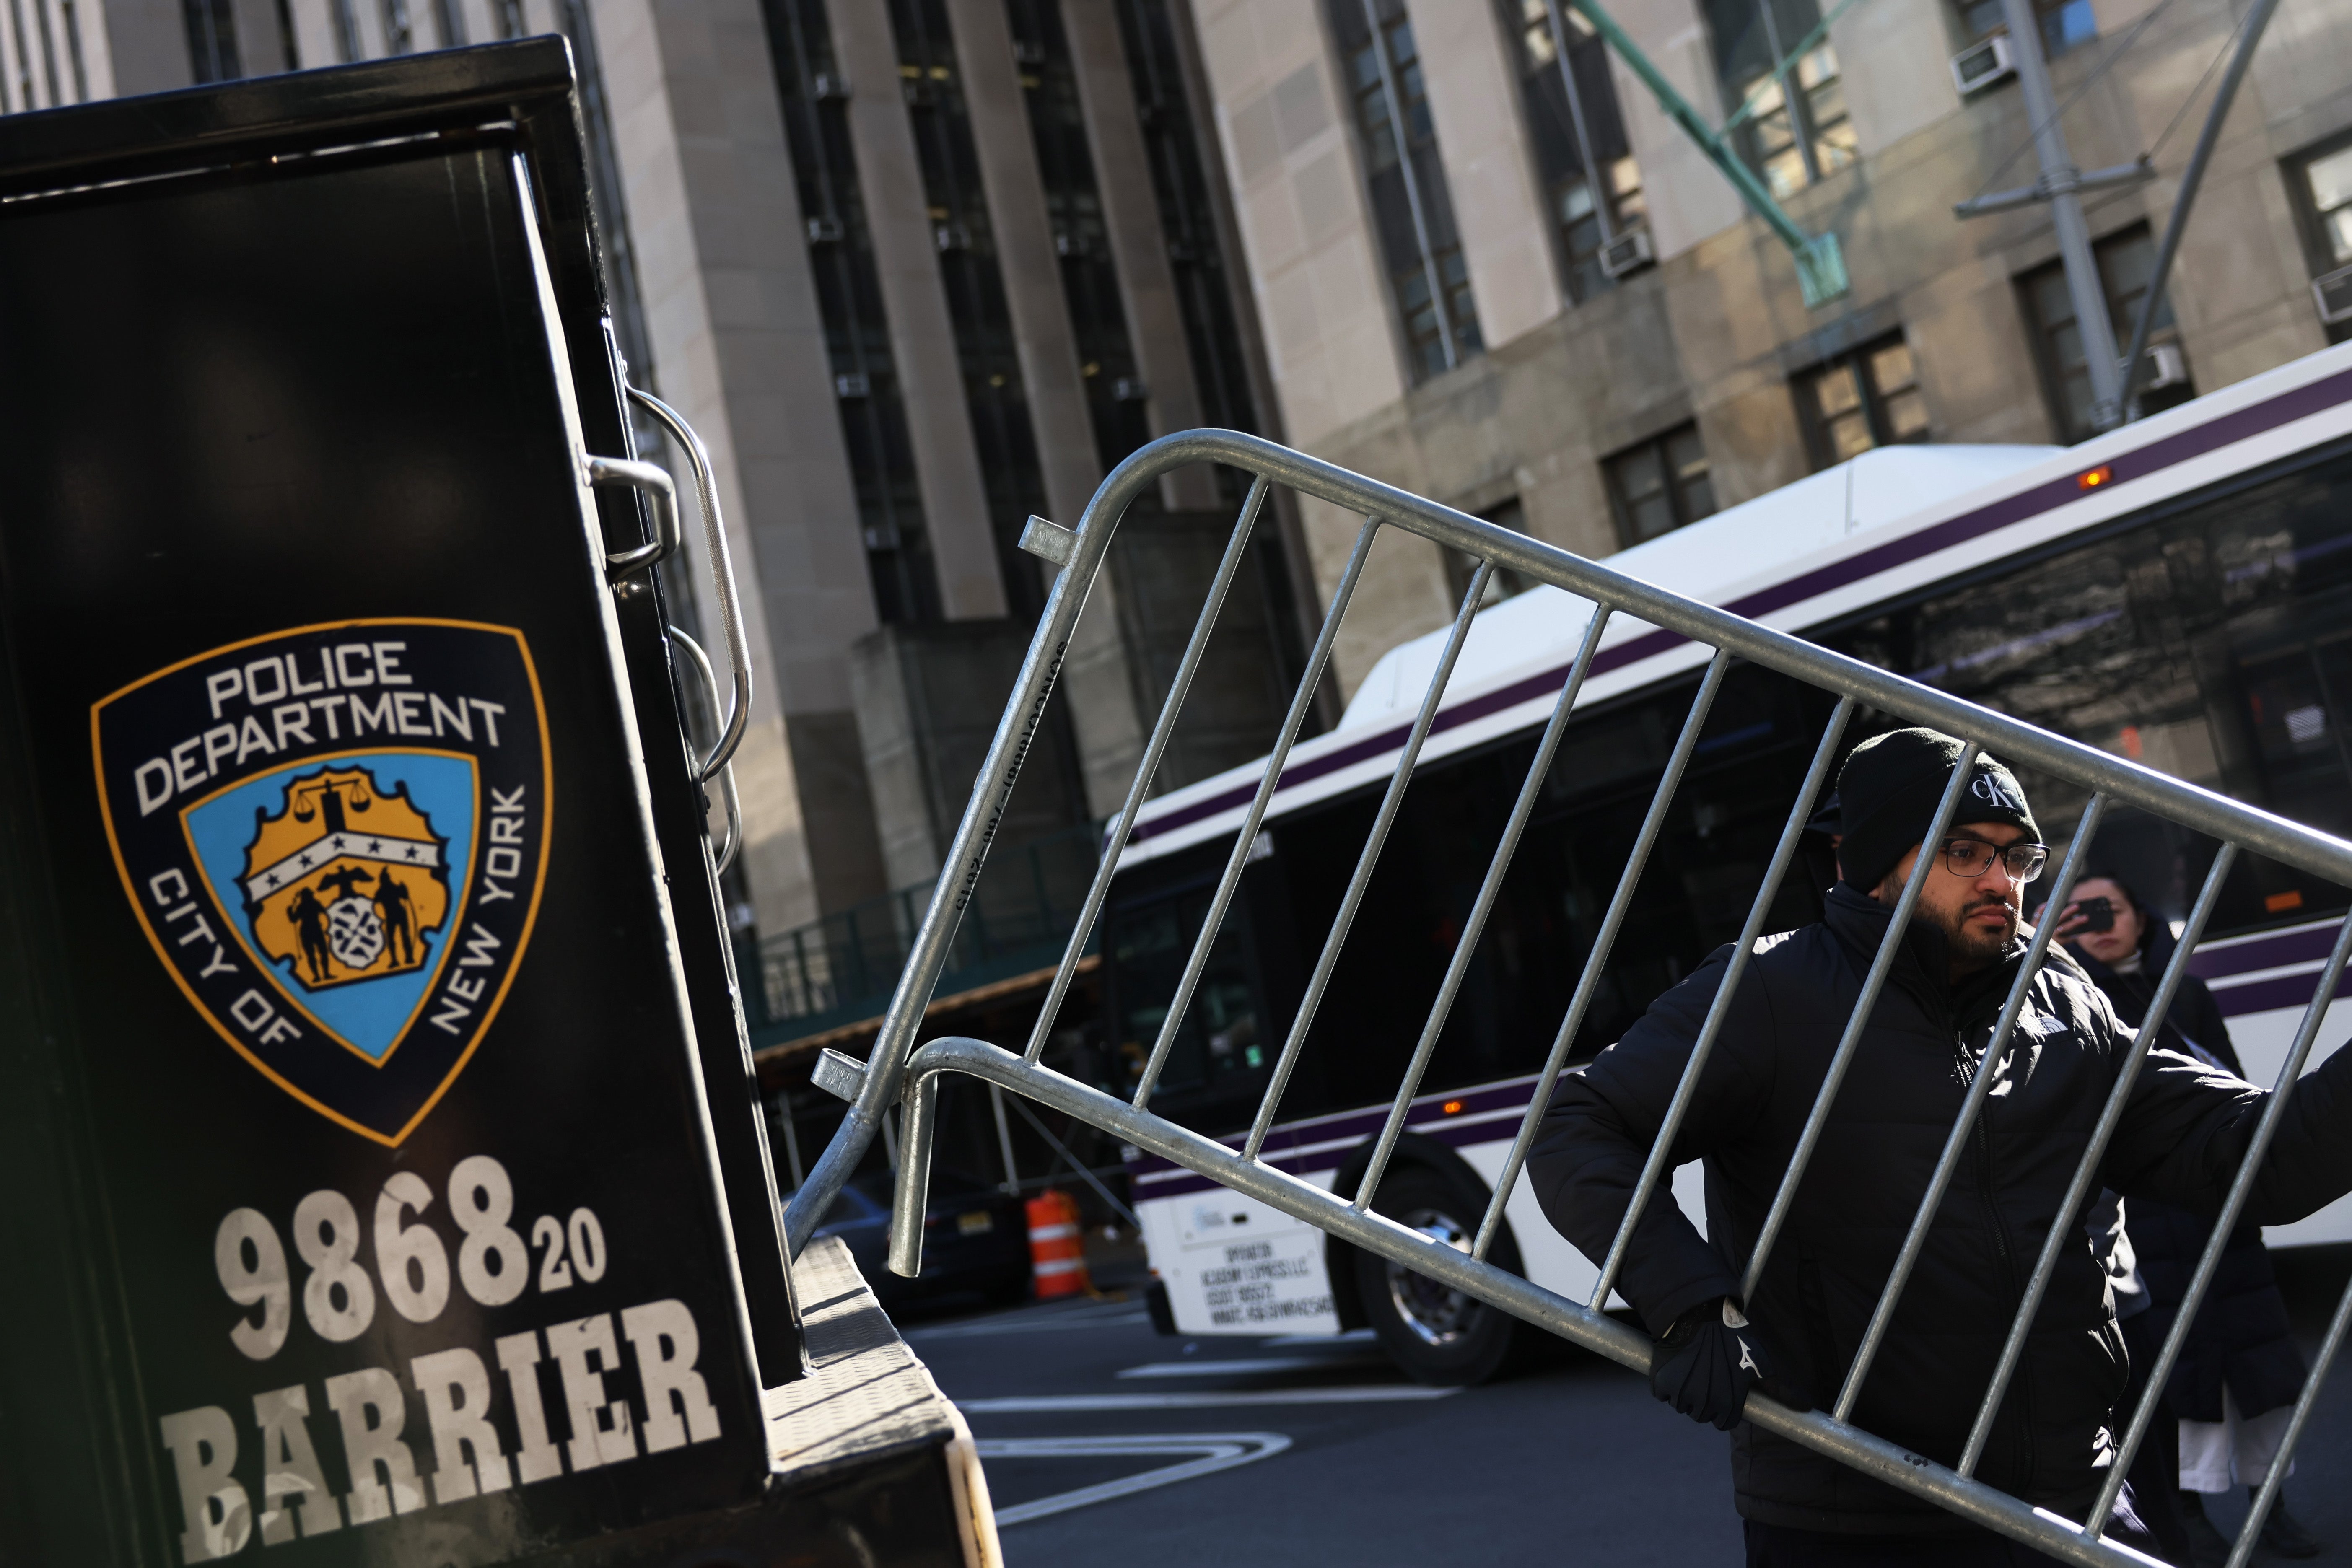 NYPD drop off metal barricades in front of Manhattan Criminal Court on March 20, 2023 in New York City amid reports Donald Trump may be indicted